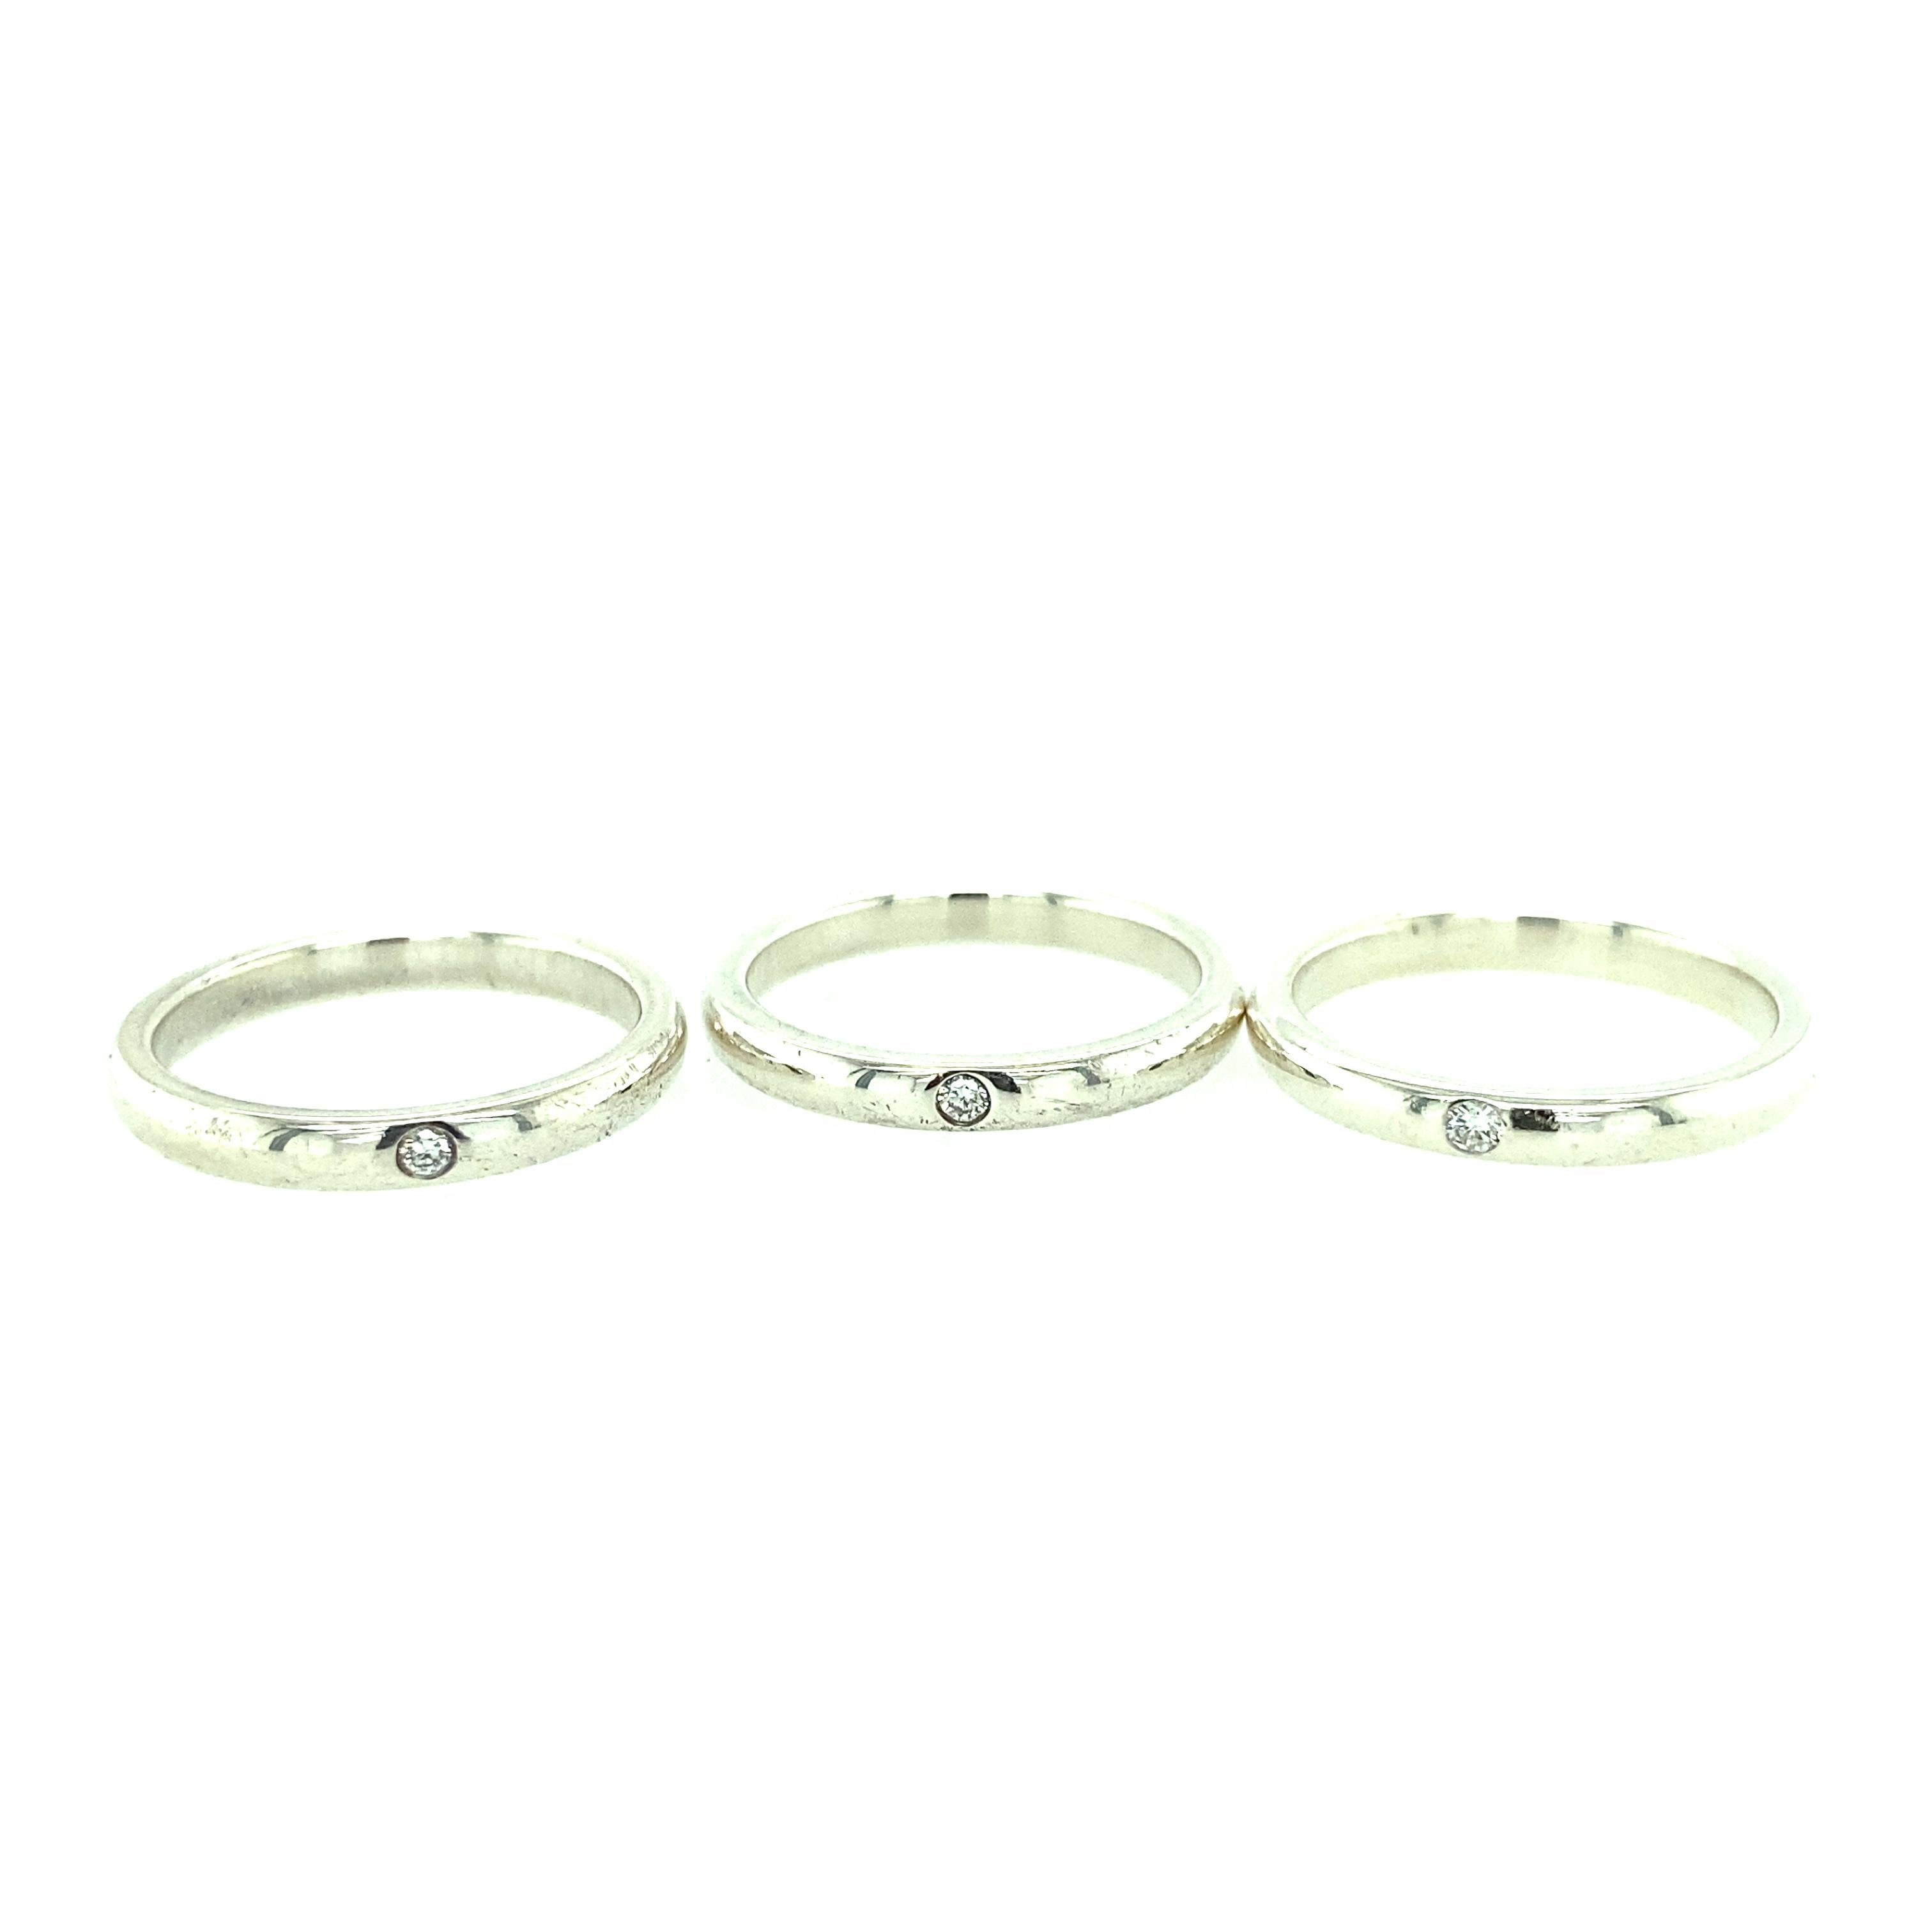 One set of three sterling silver 2.65mm bands each set with one brilliant cut diamond, approximately, 0.10 carat total weight with matching H-I color and SI clarity.  The rings are a finger size 6.5.   